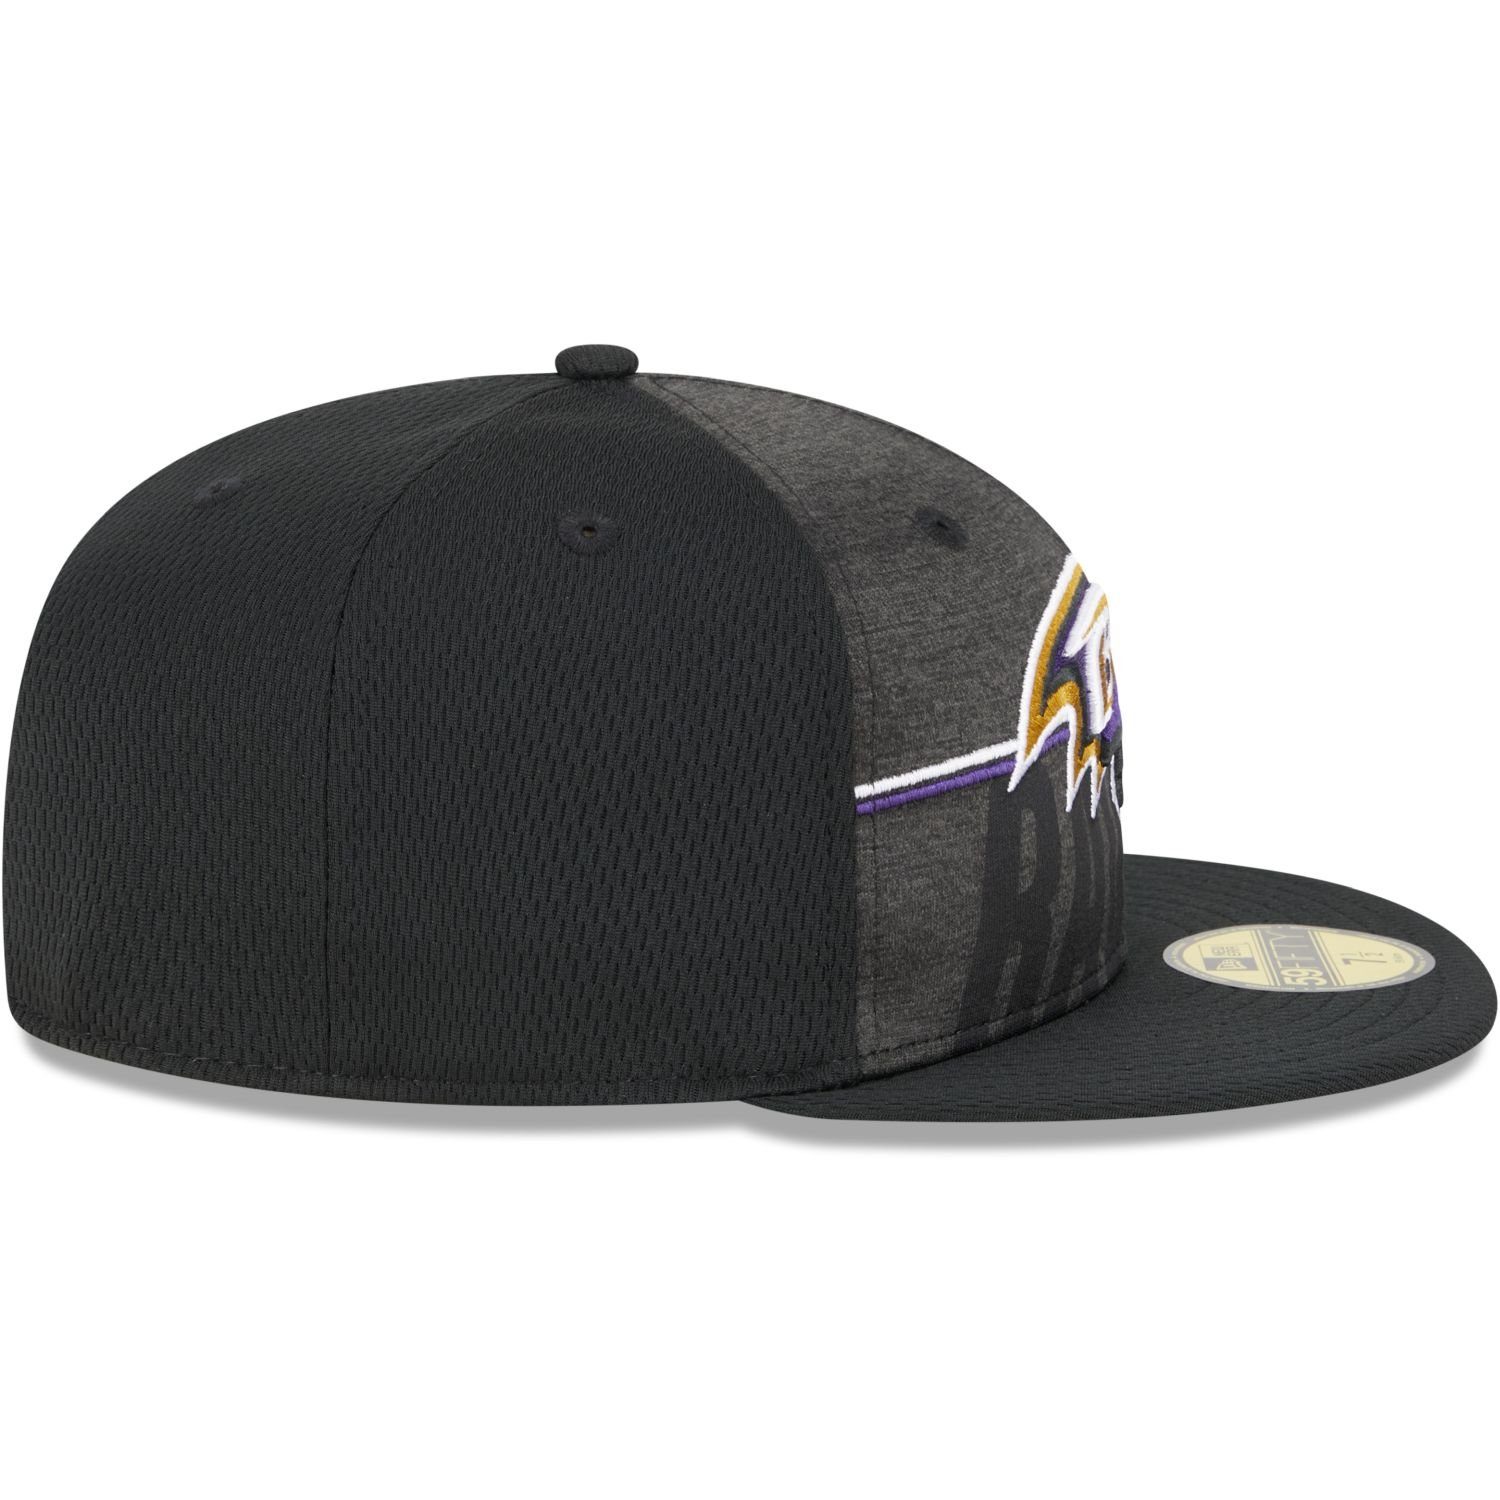 New Era Fitted NFL TRAINING Ravens Cap 59Fifty Baltimore